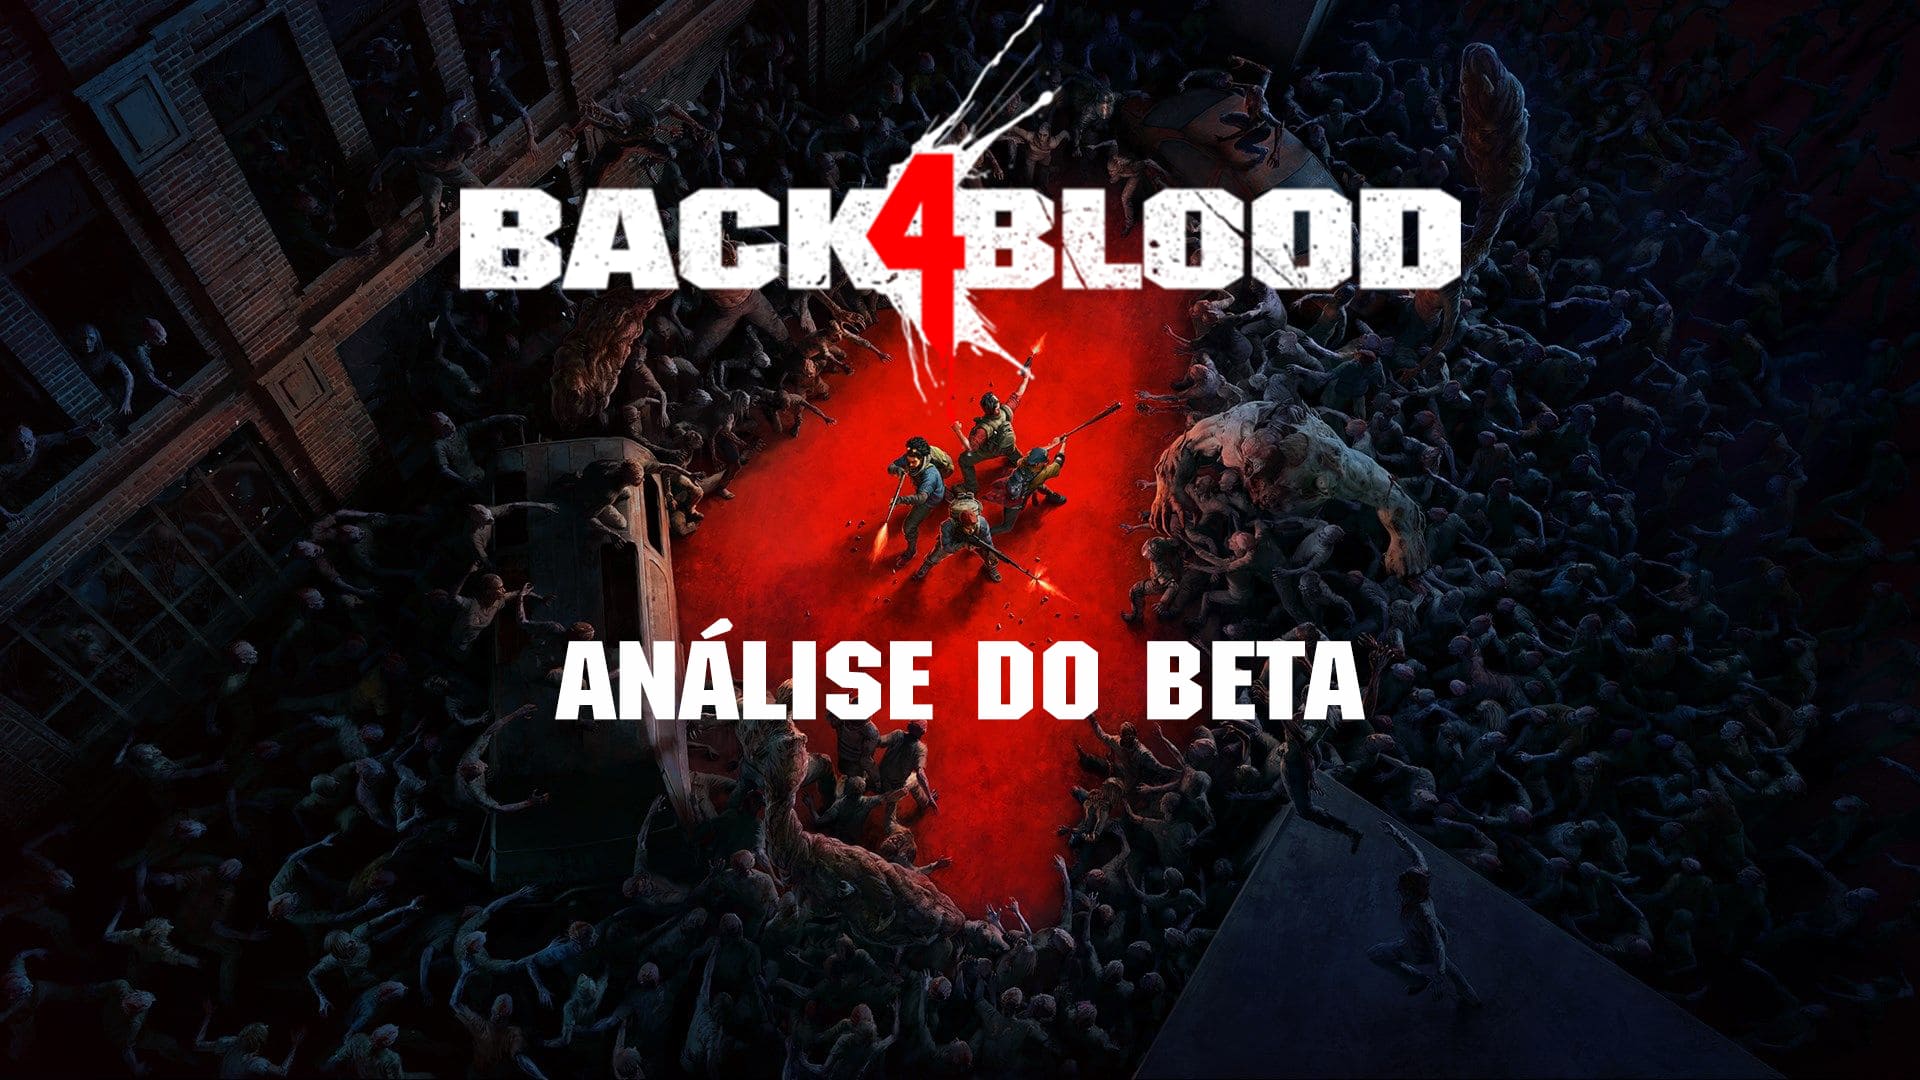 Does Back 4 Blood have crossplay multiplayer?